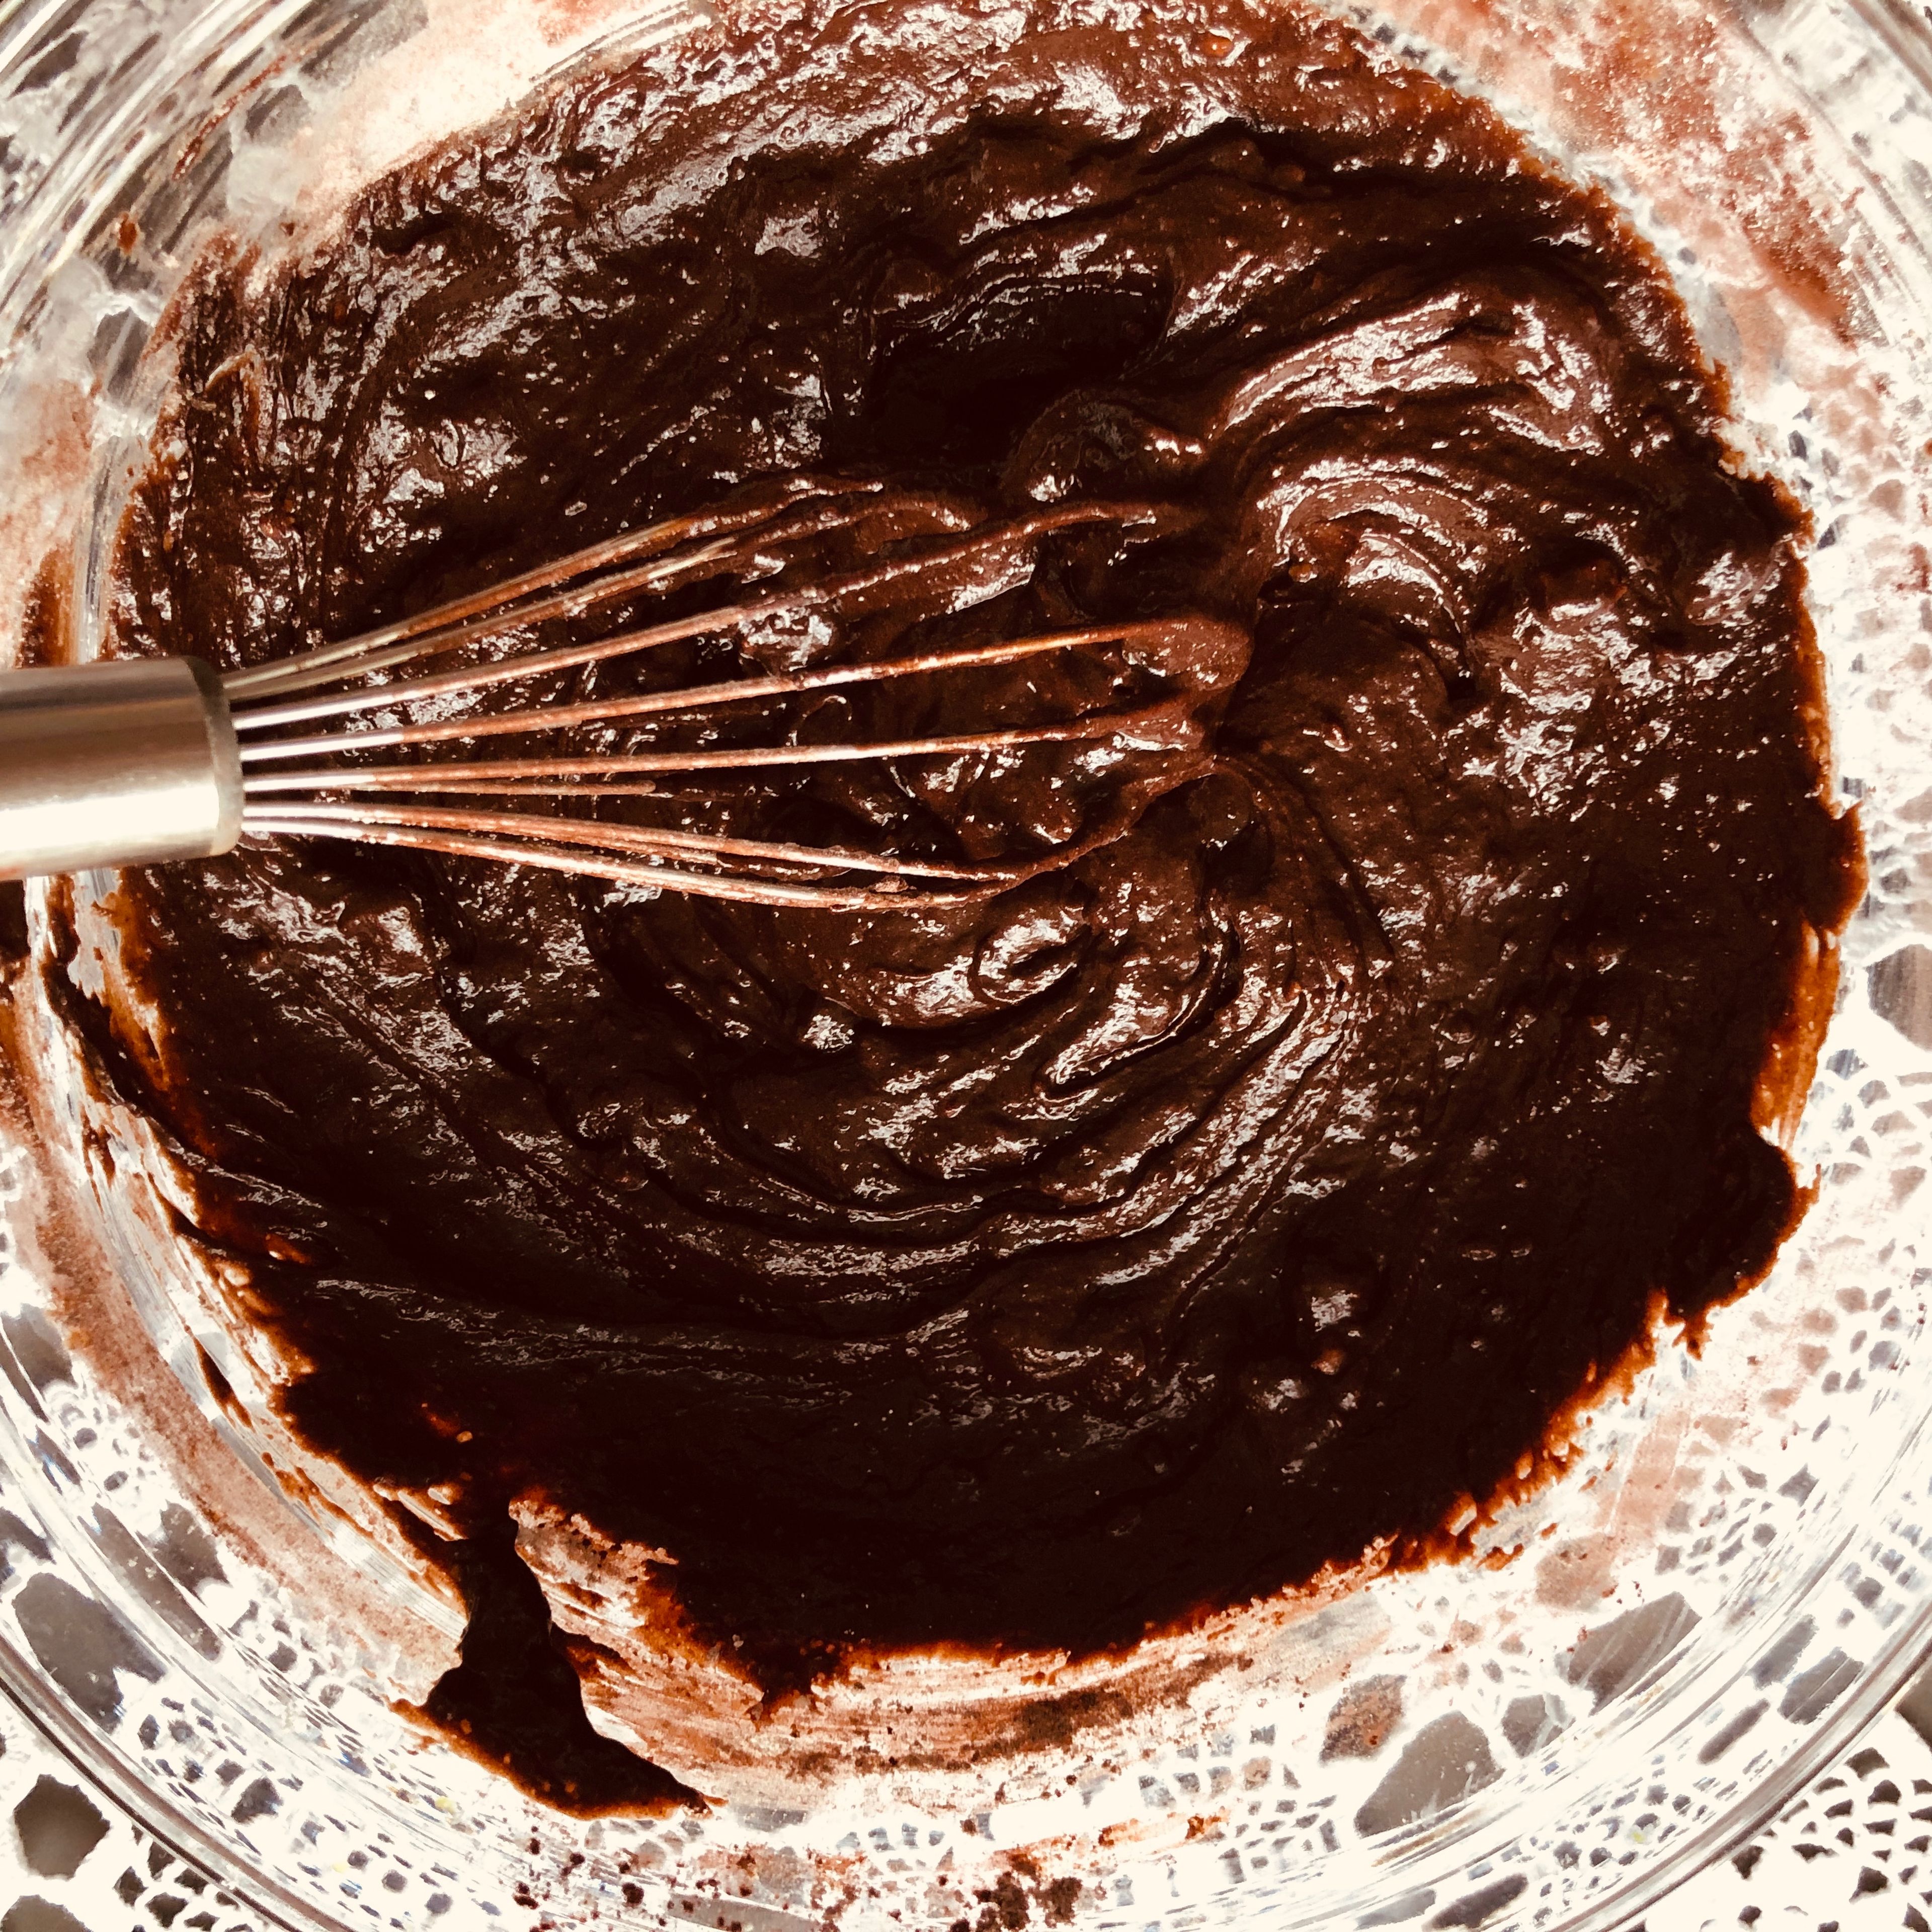 Sift the spilt flour and cocoa powder into the bowl and fold in with a spatula. Add the remaining chocolate chips and fold to incorporate .